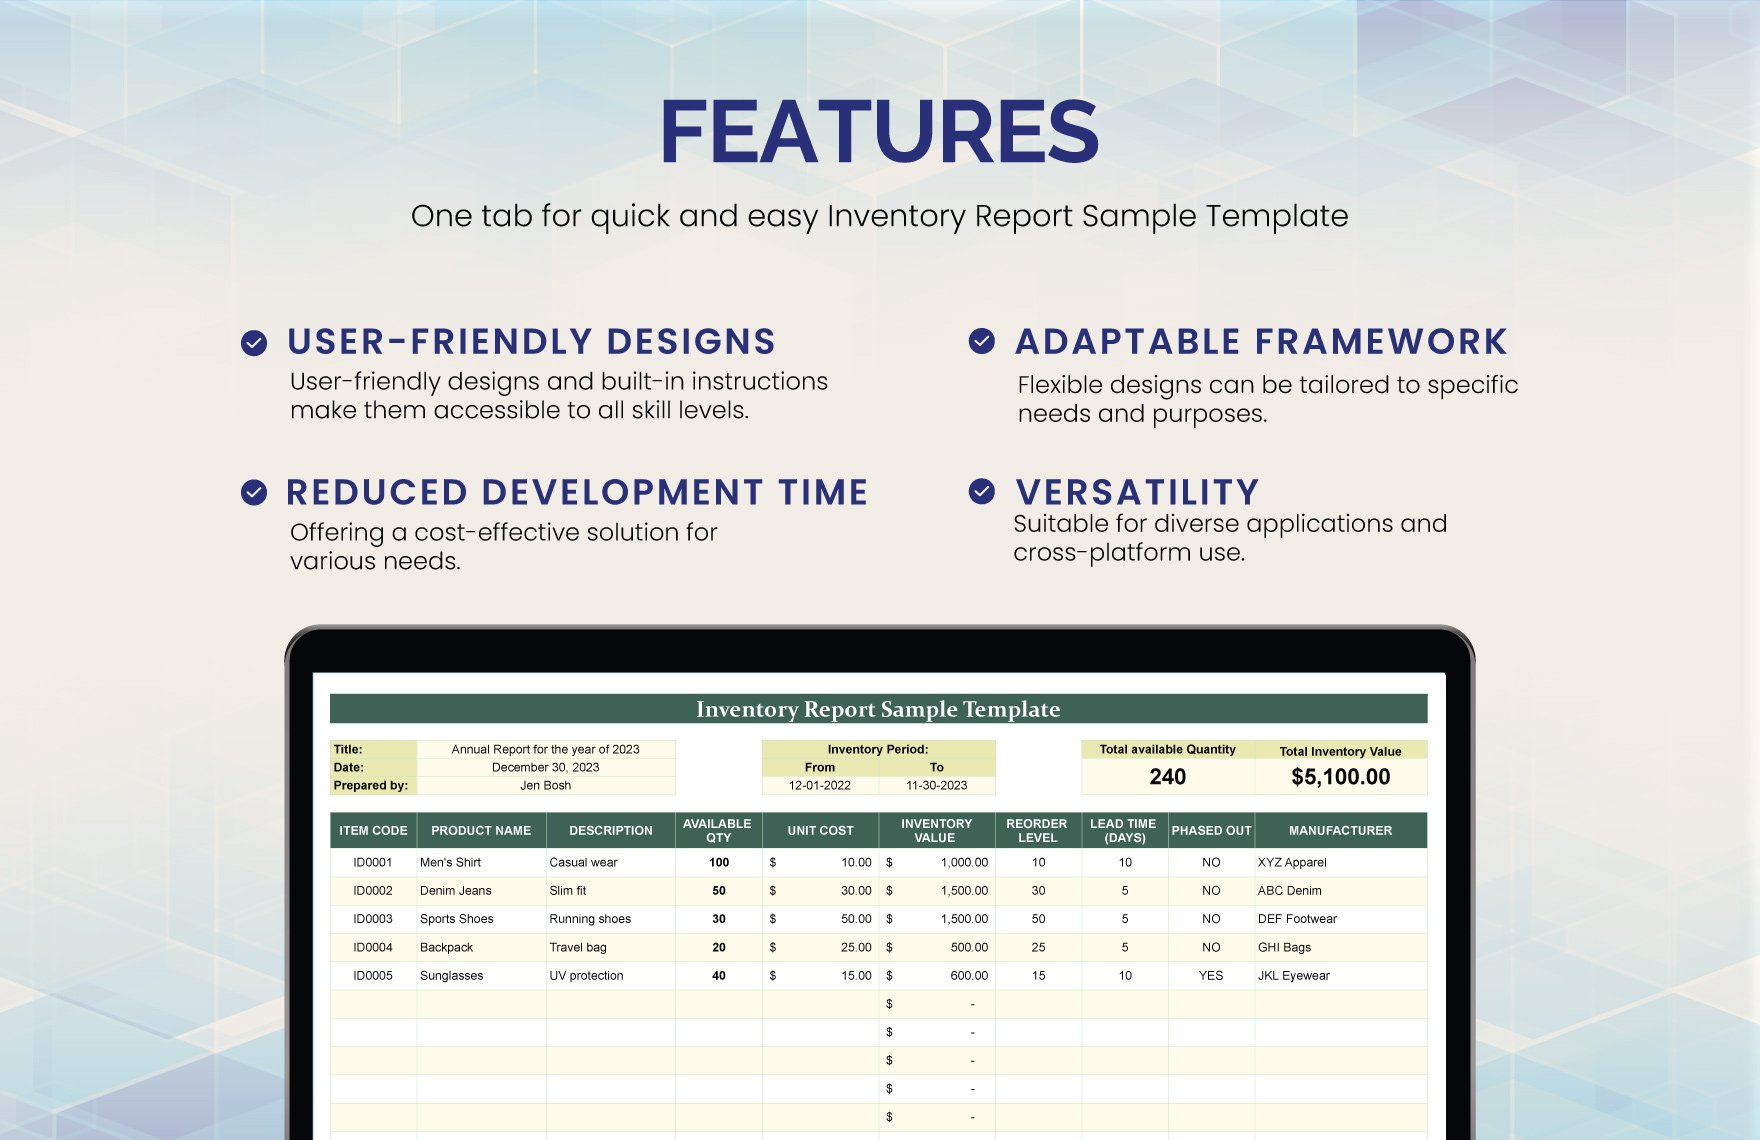 Inventory Report Sample Template